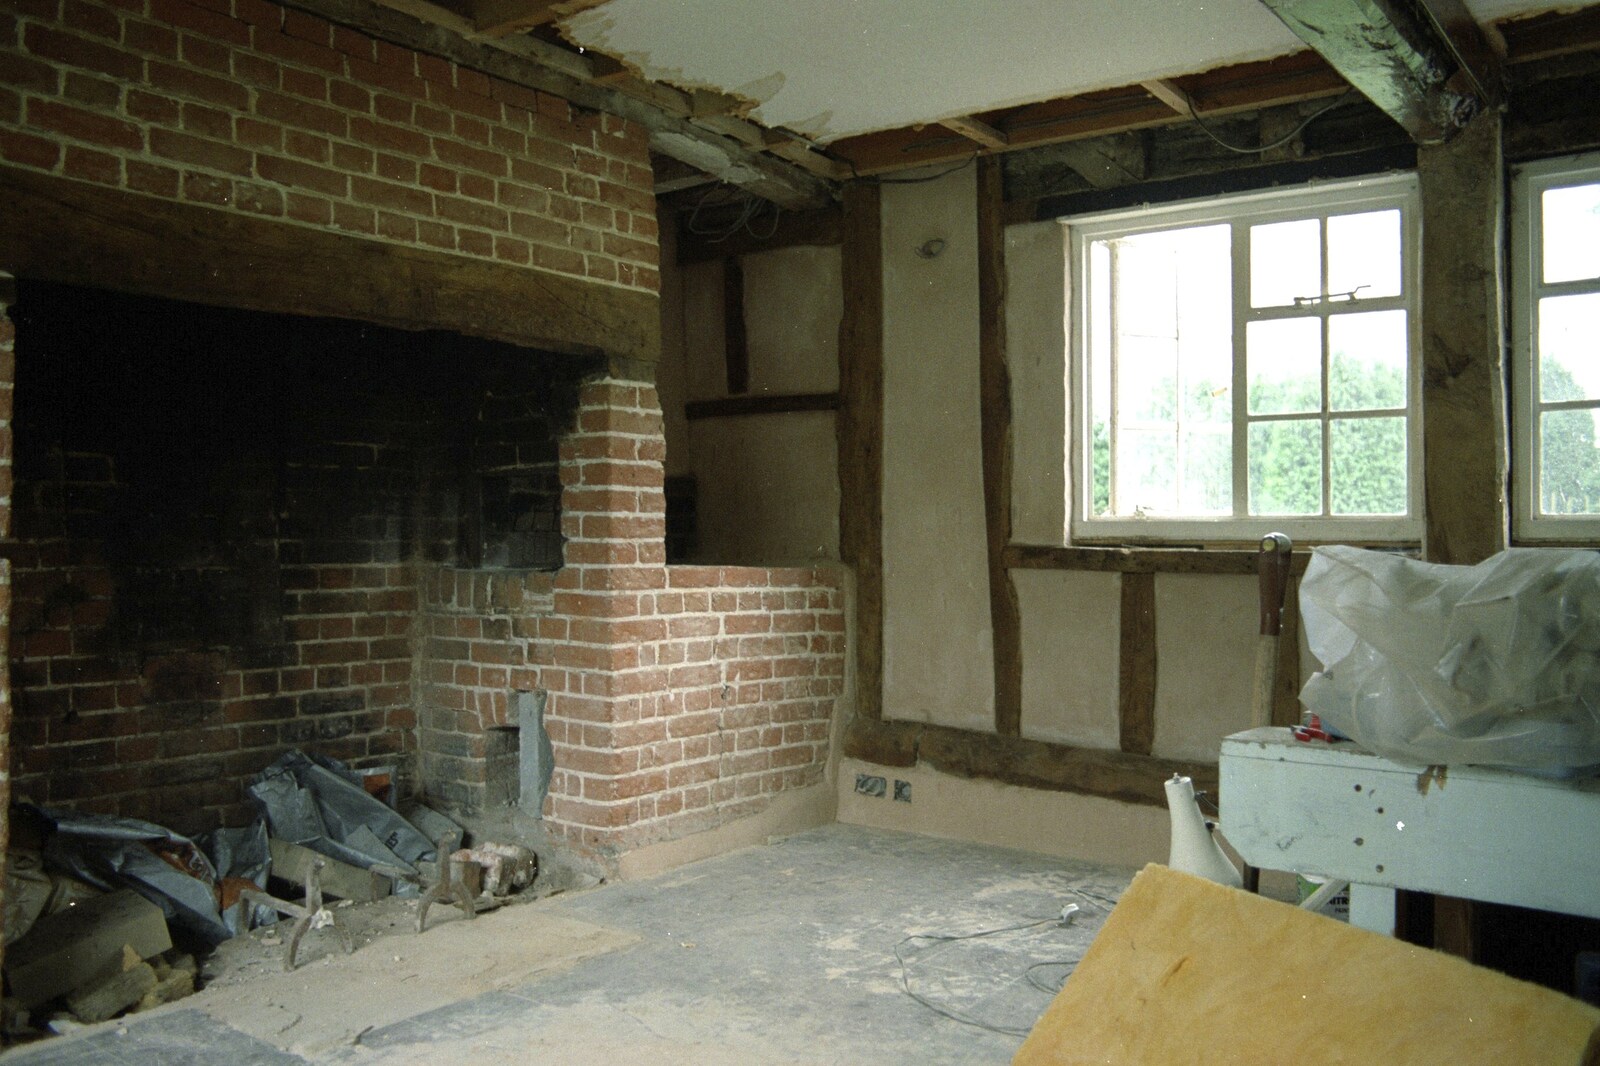 A mostly-plastered lounge from Tone's Wedding, Mundford, Norfolk - 27th August 1994